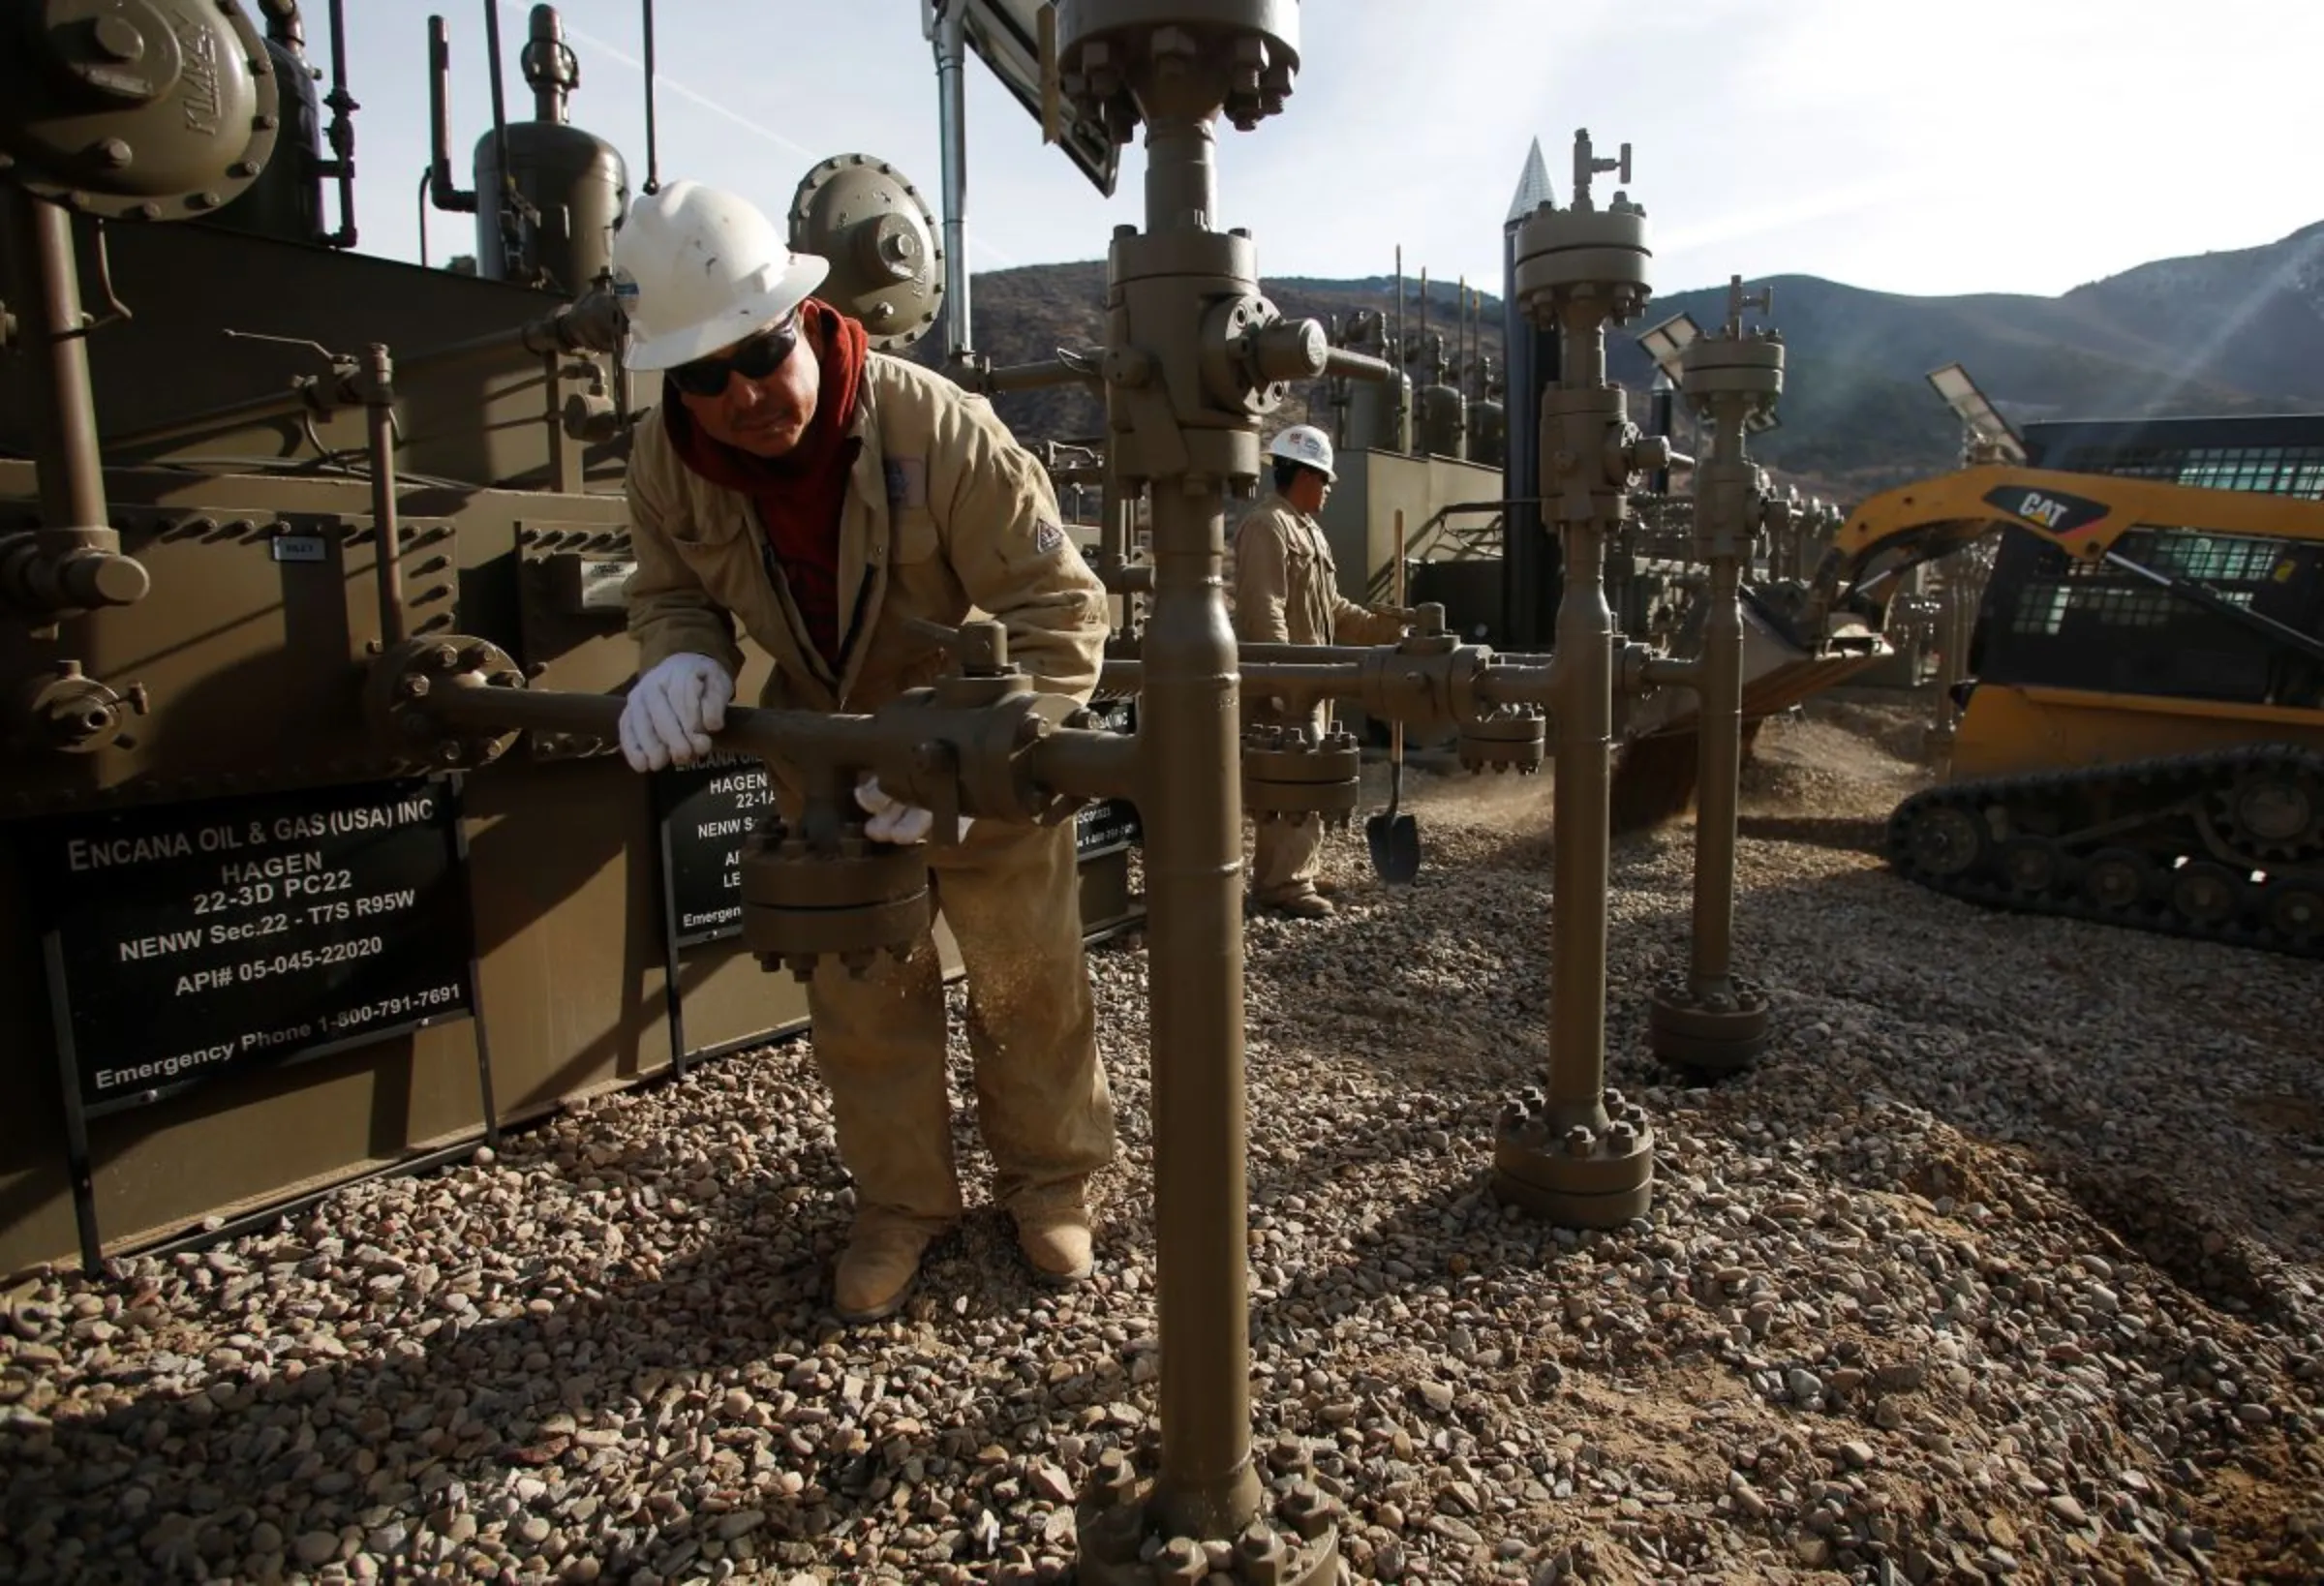 Workers put the final touches on a natural gas well platform owned by Encana south of Parachute, Colorado, December 8, 2014. REUTERS/Jim Urquhart